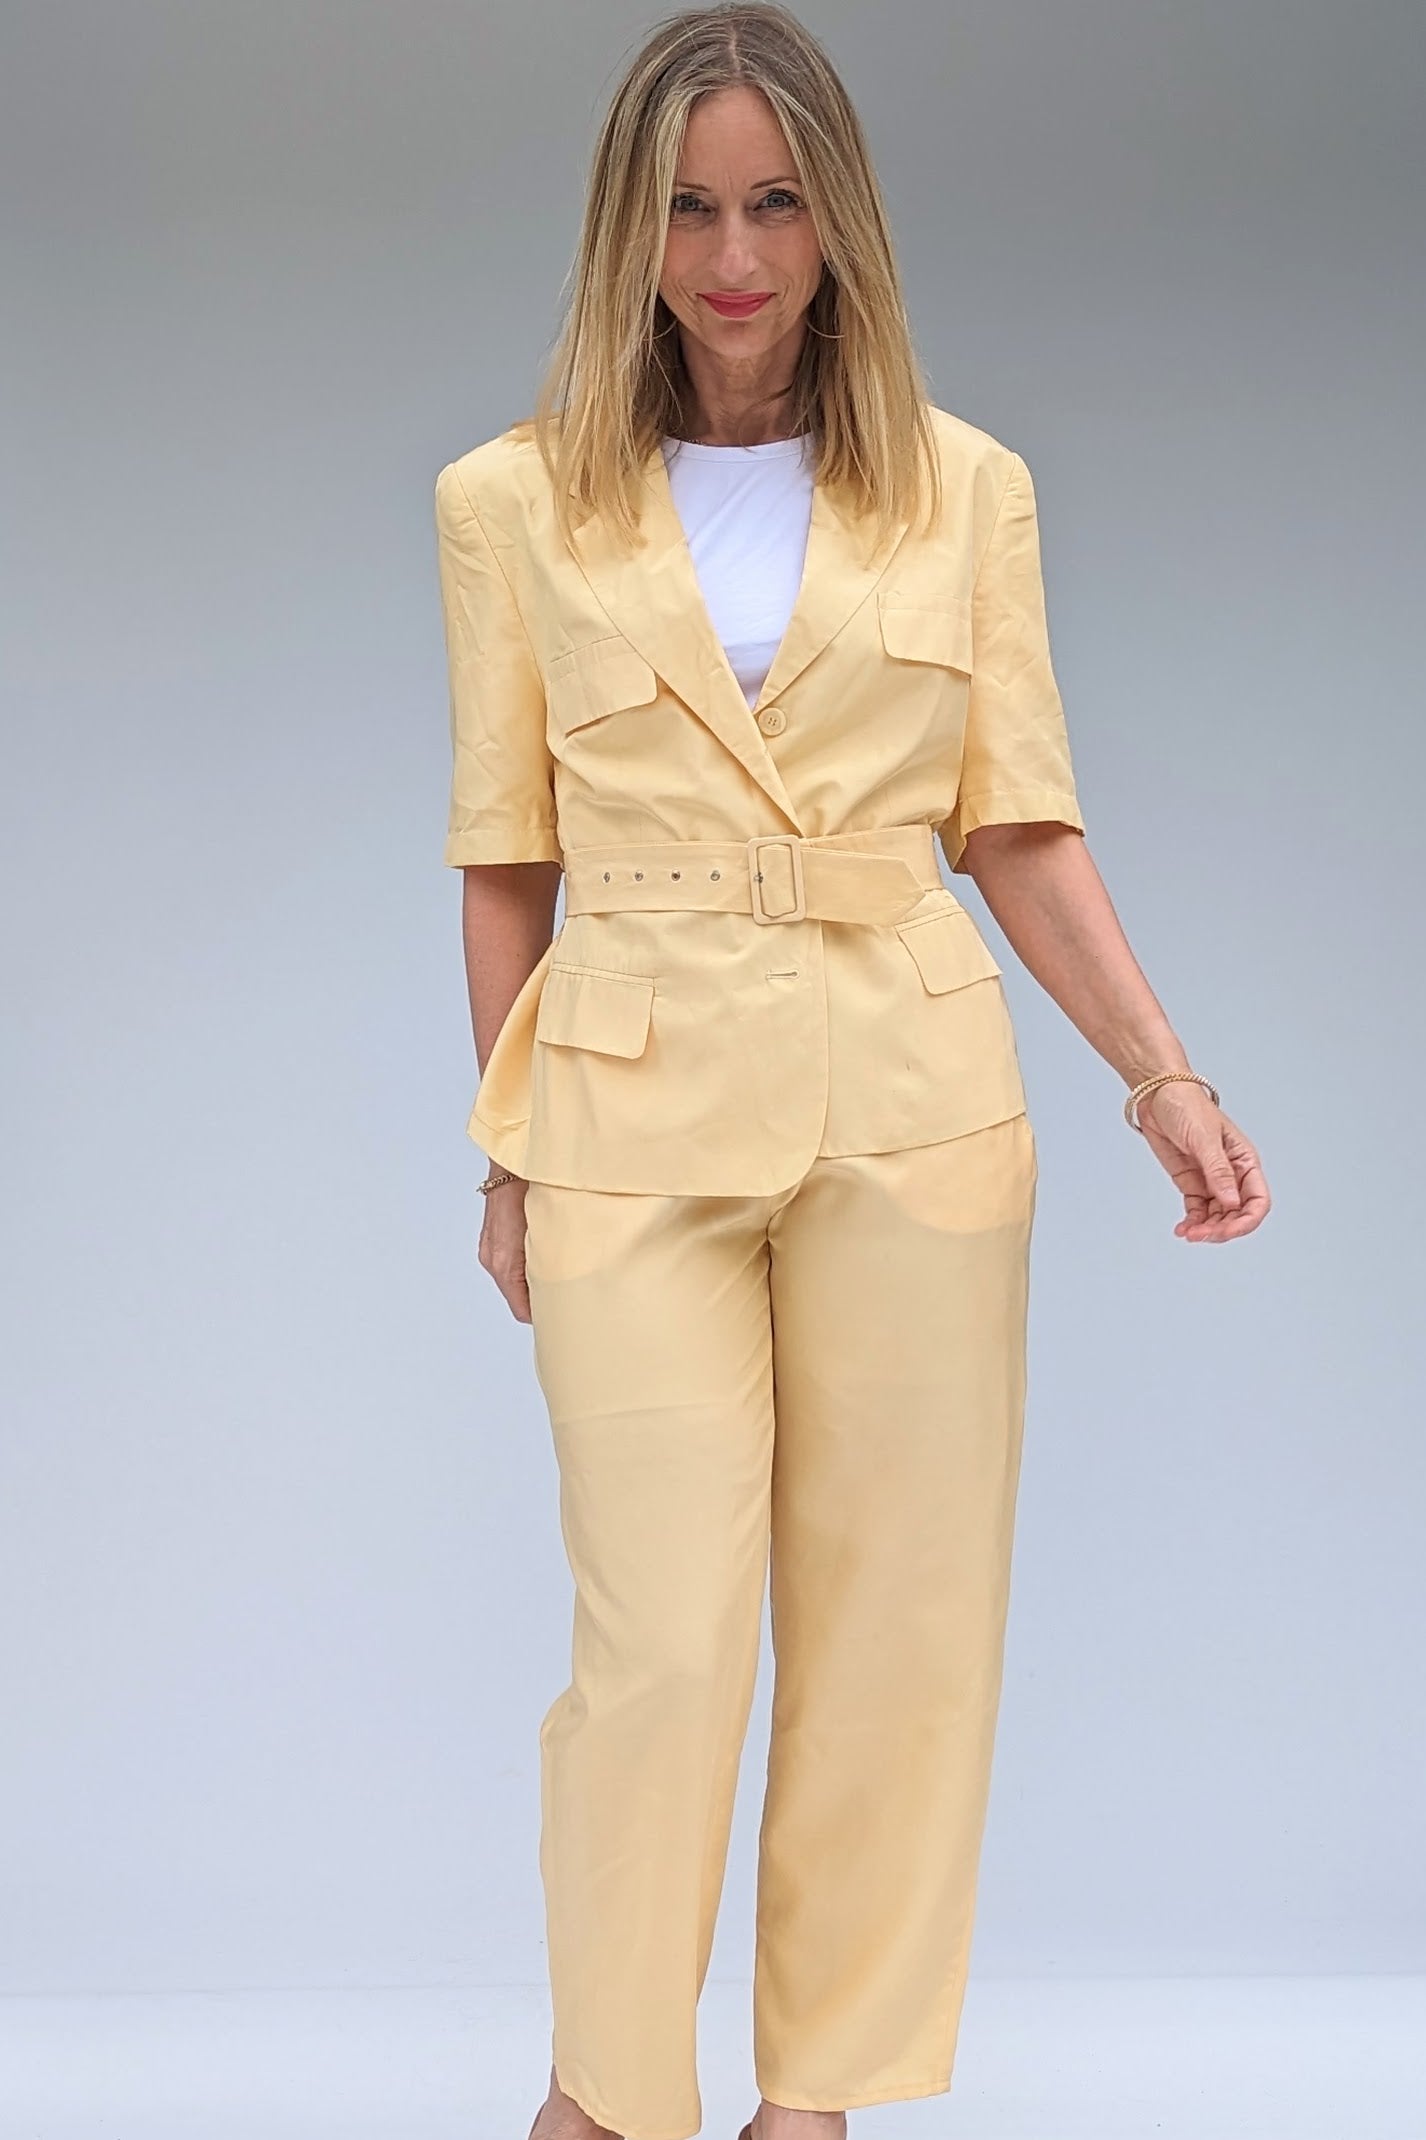 Wedding guest vintage yellow suit